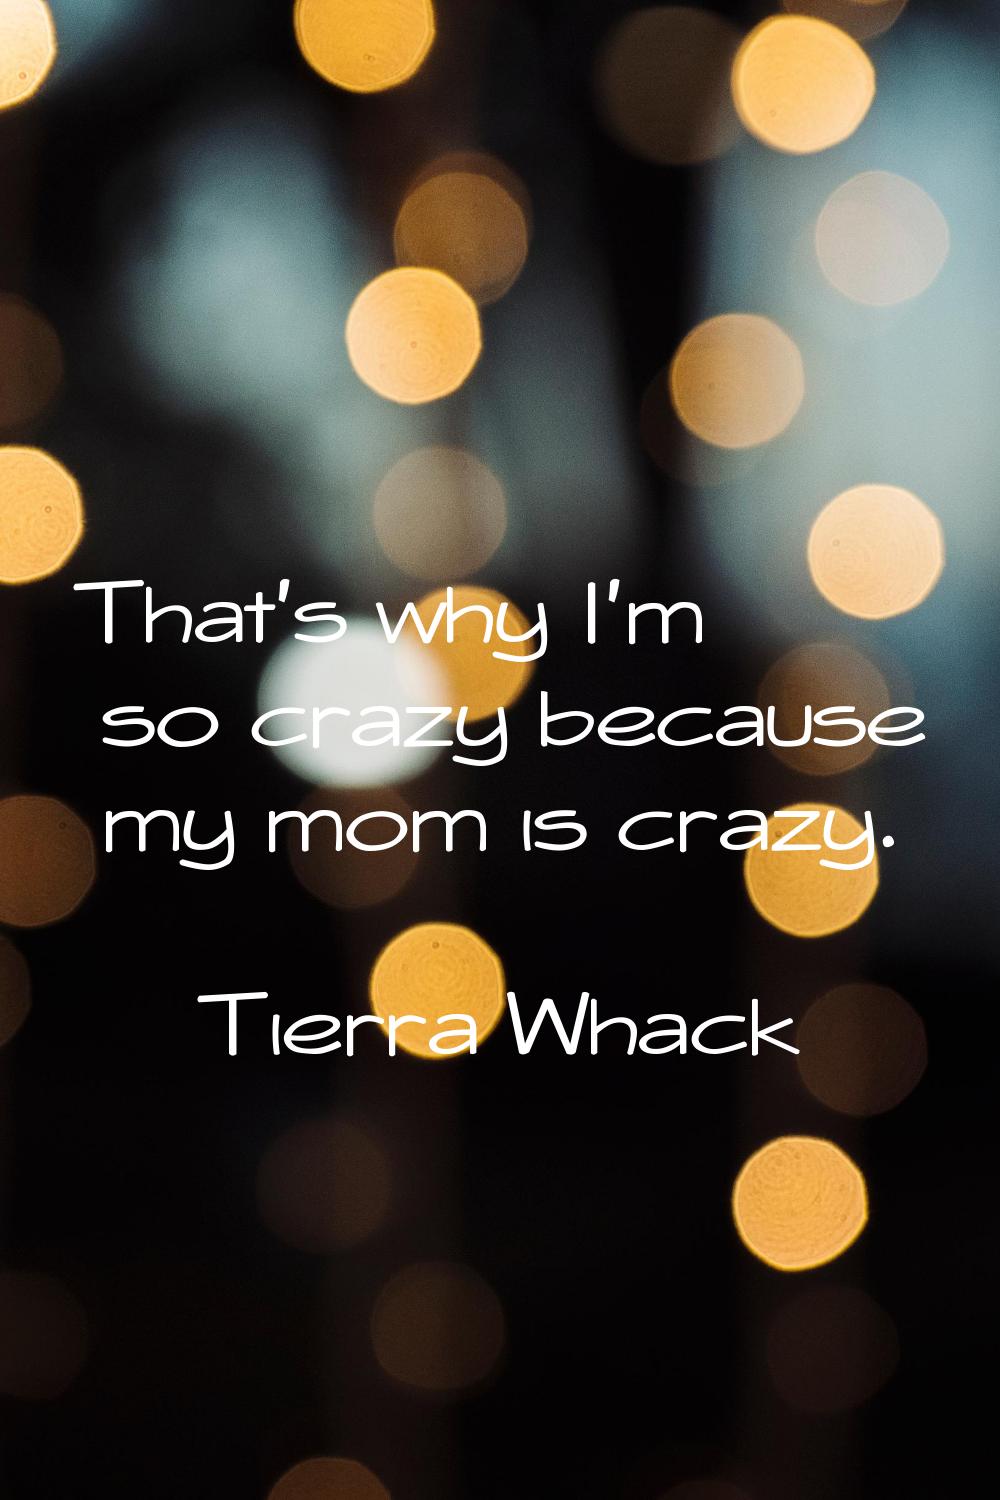 That's why I'm so crazy because my mom is crazy.